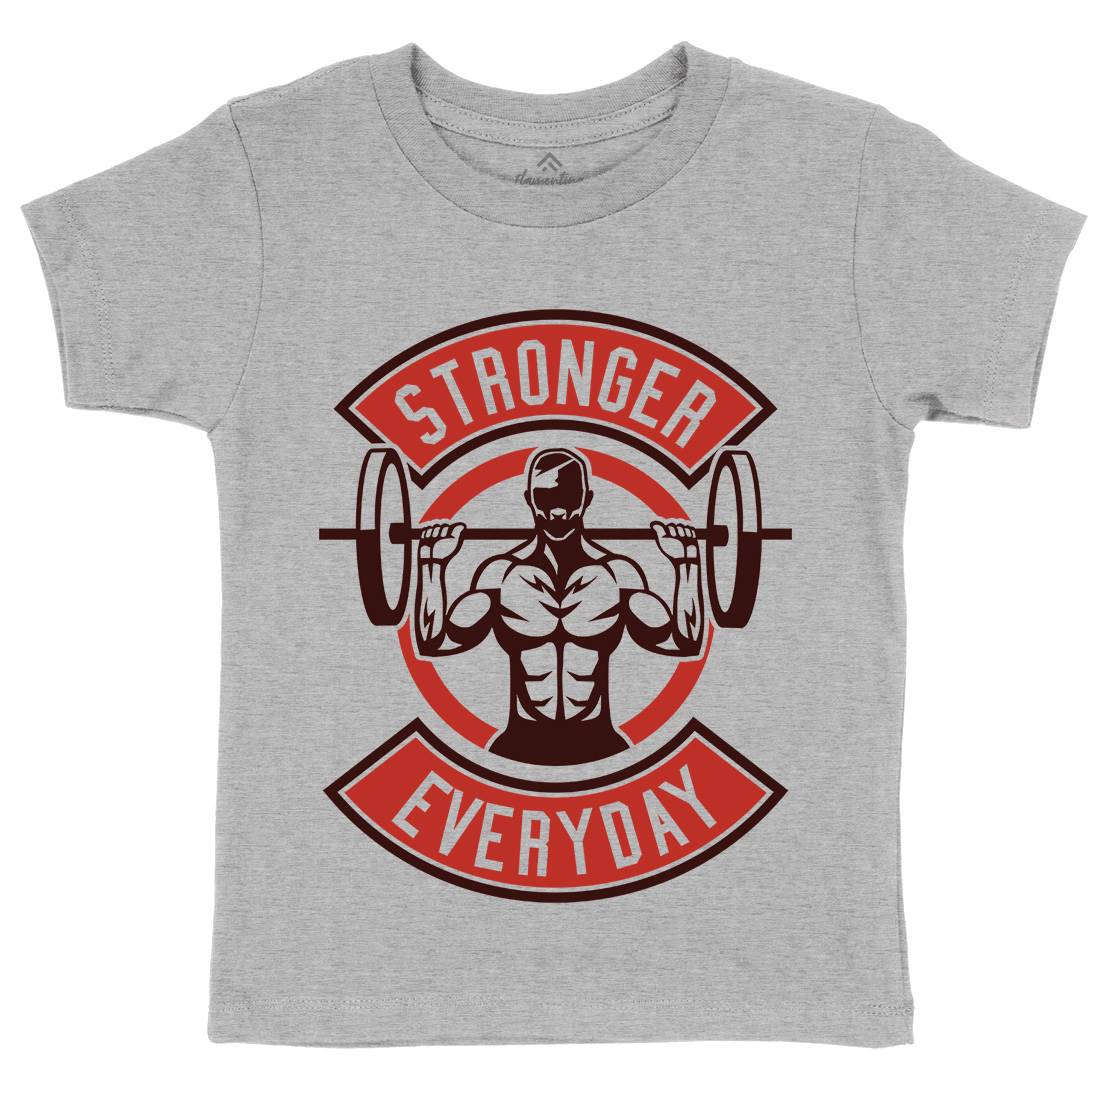 Stronger Everyday Kids Crew Neck T-Shirt Gym A289